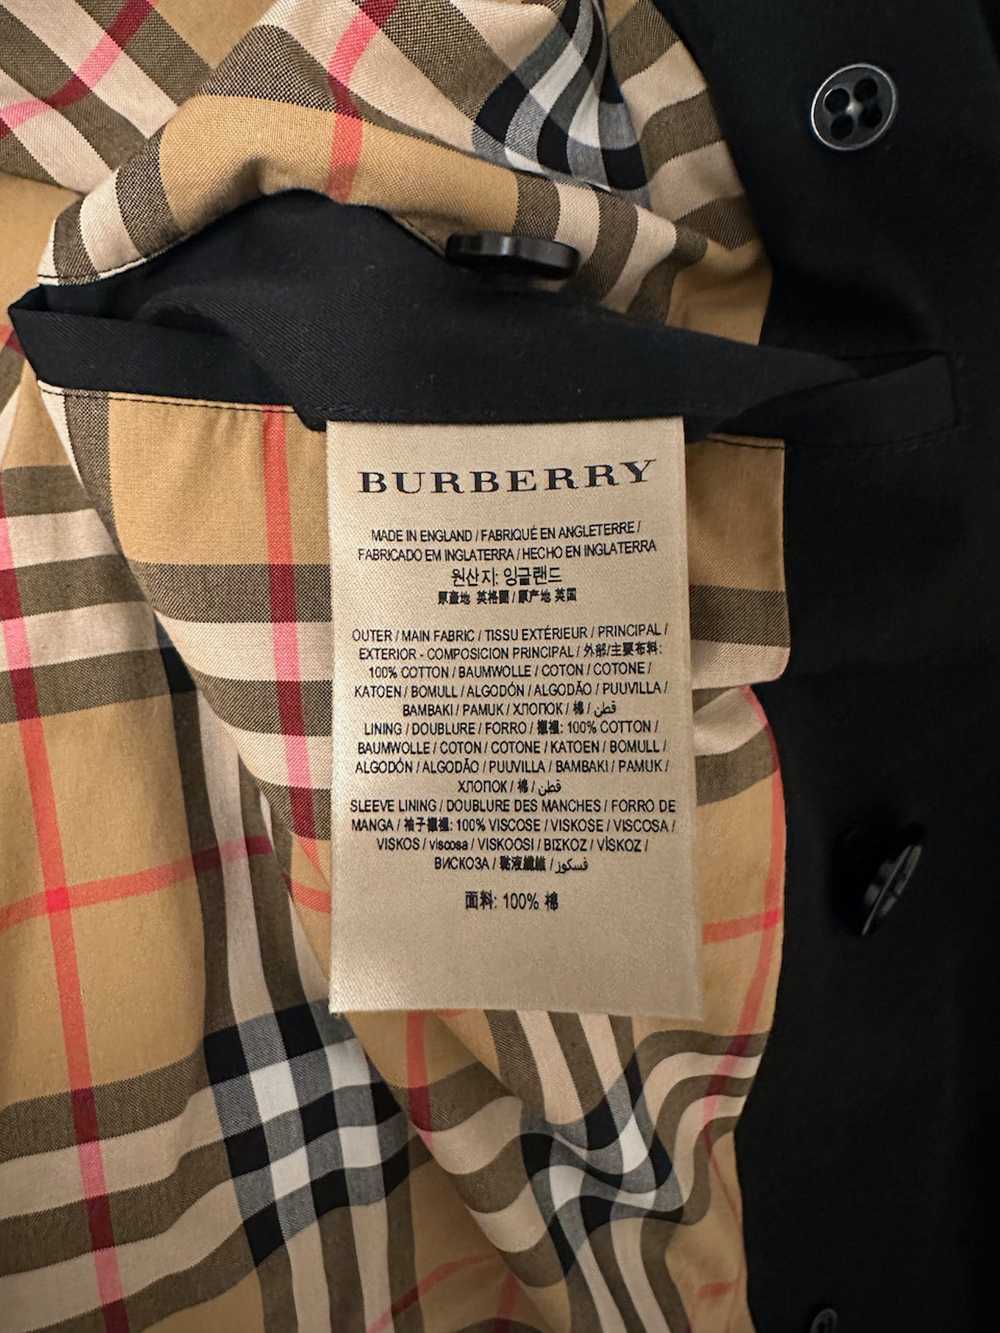 Burberry Burberry Westminster Heritage Trench Coat - image 3